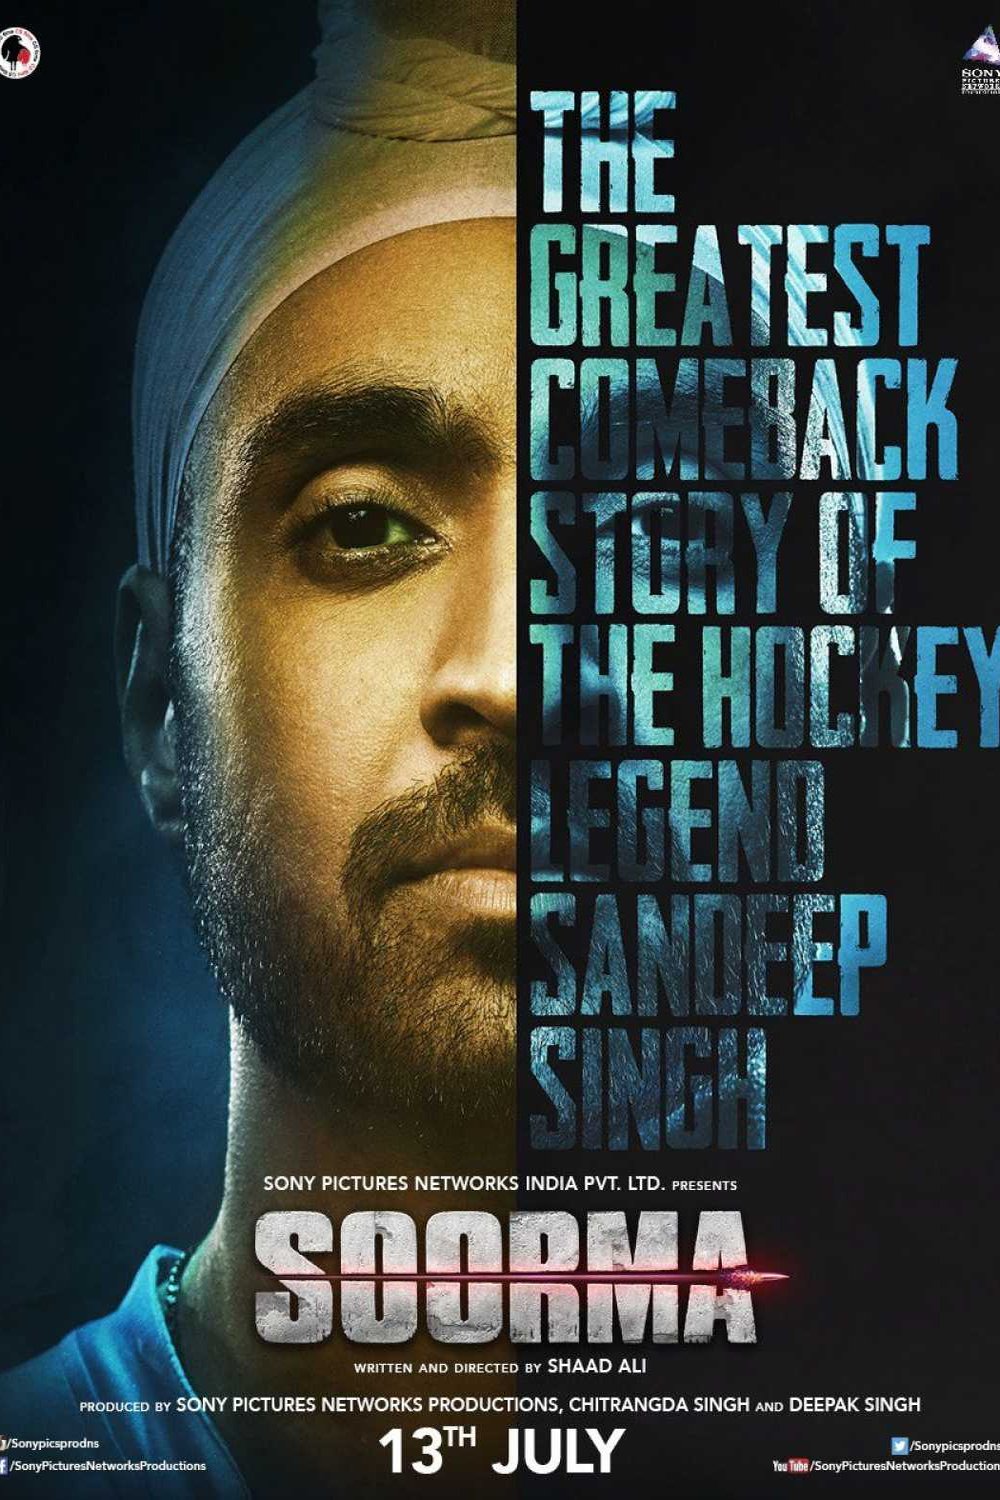 Hindi poster of the movie Soorma